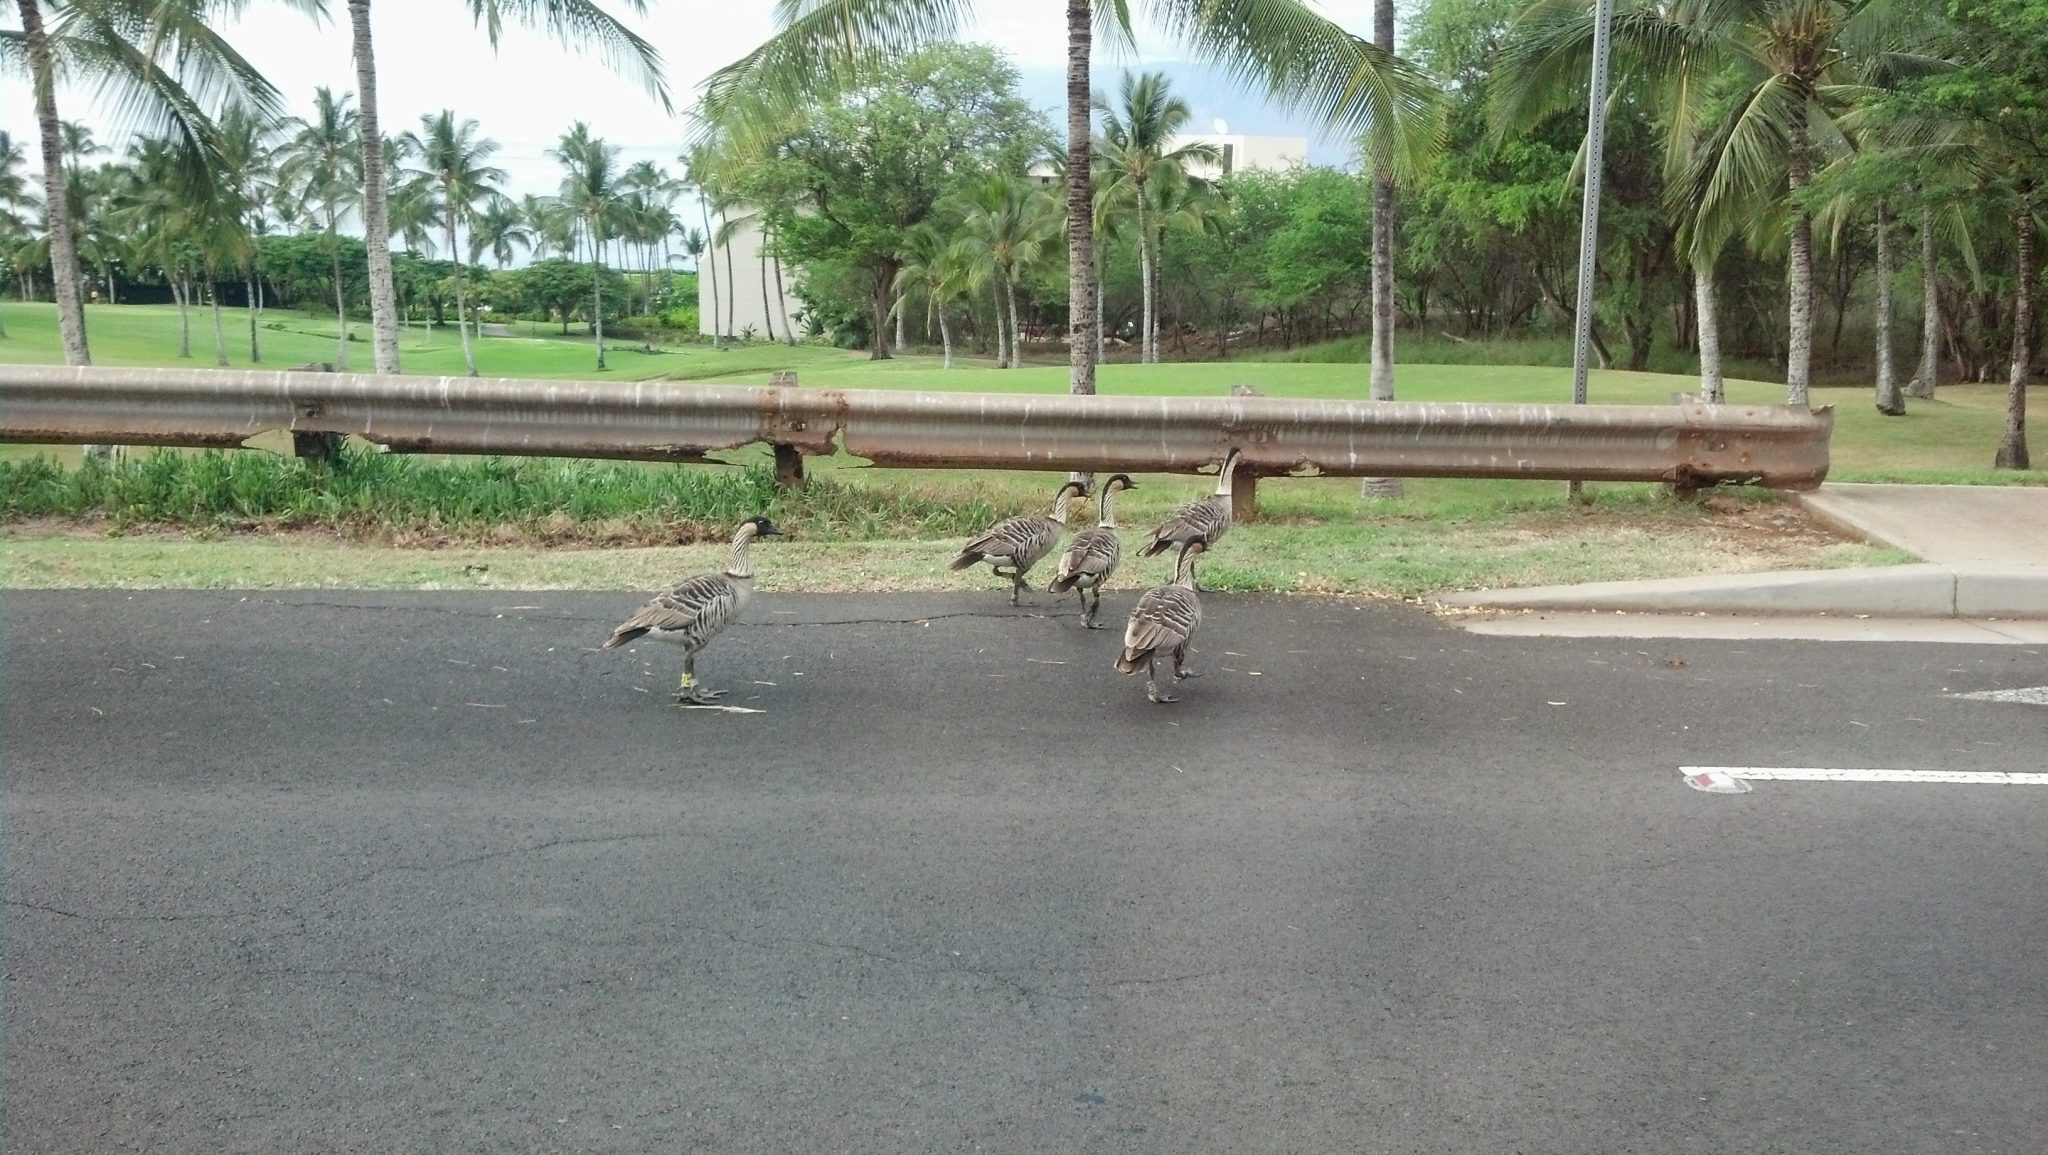 An image of nēnē in a roadway